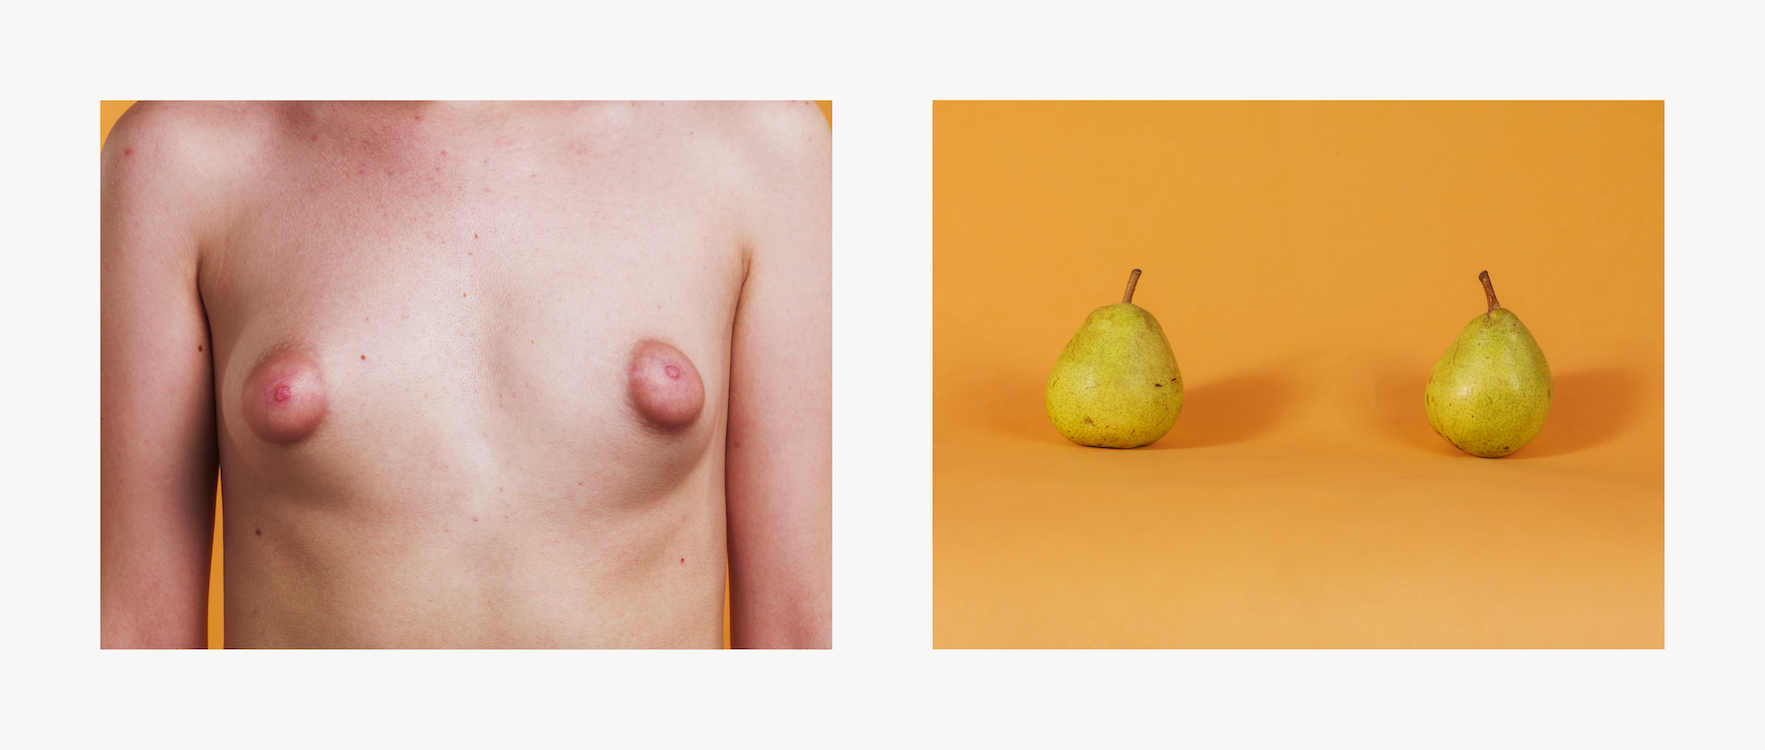 02-boobs-personal-work-charlotte-abramow-photography-paris-brussels